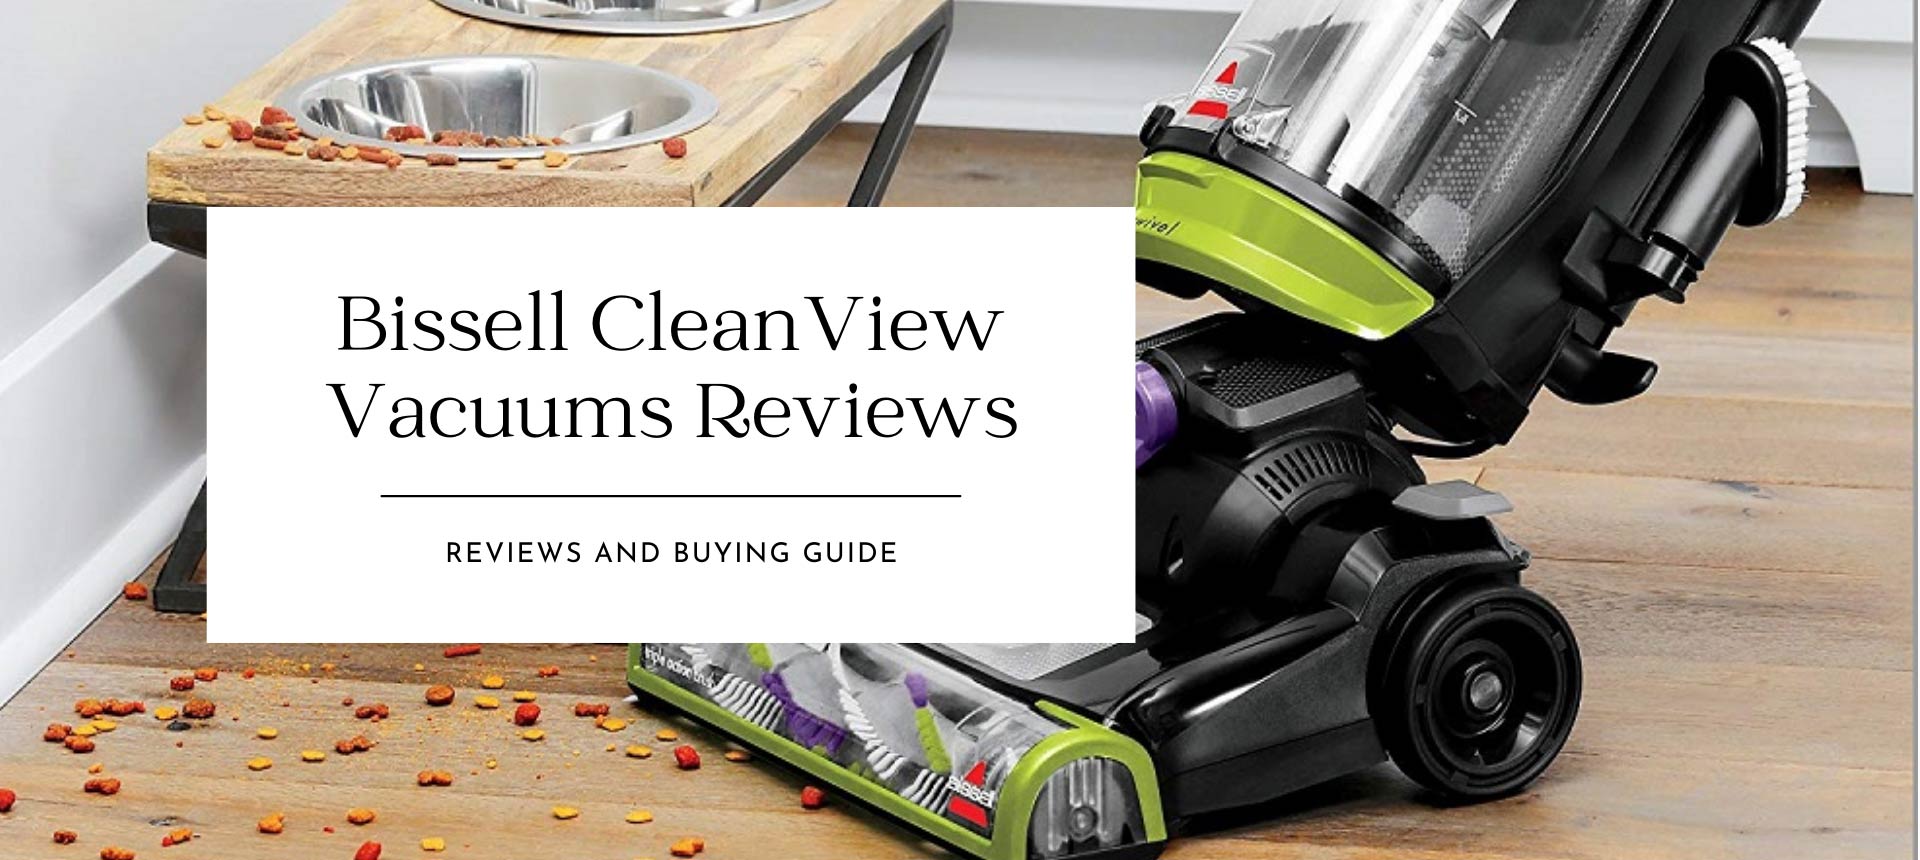 Bissell CleanView Vacuums Reviews of 2021